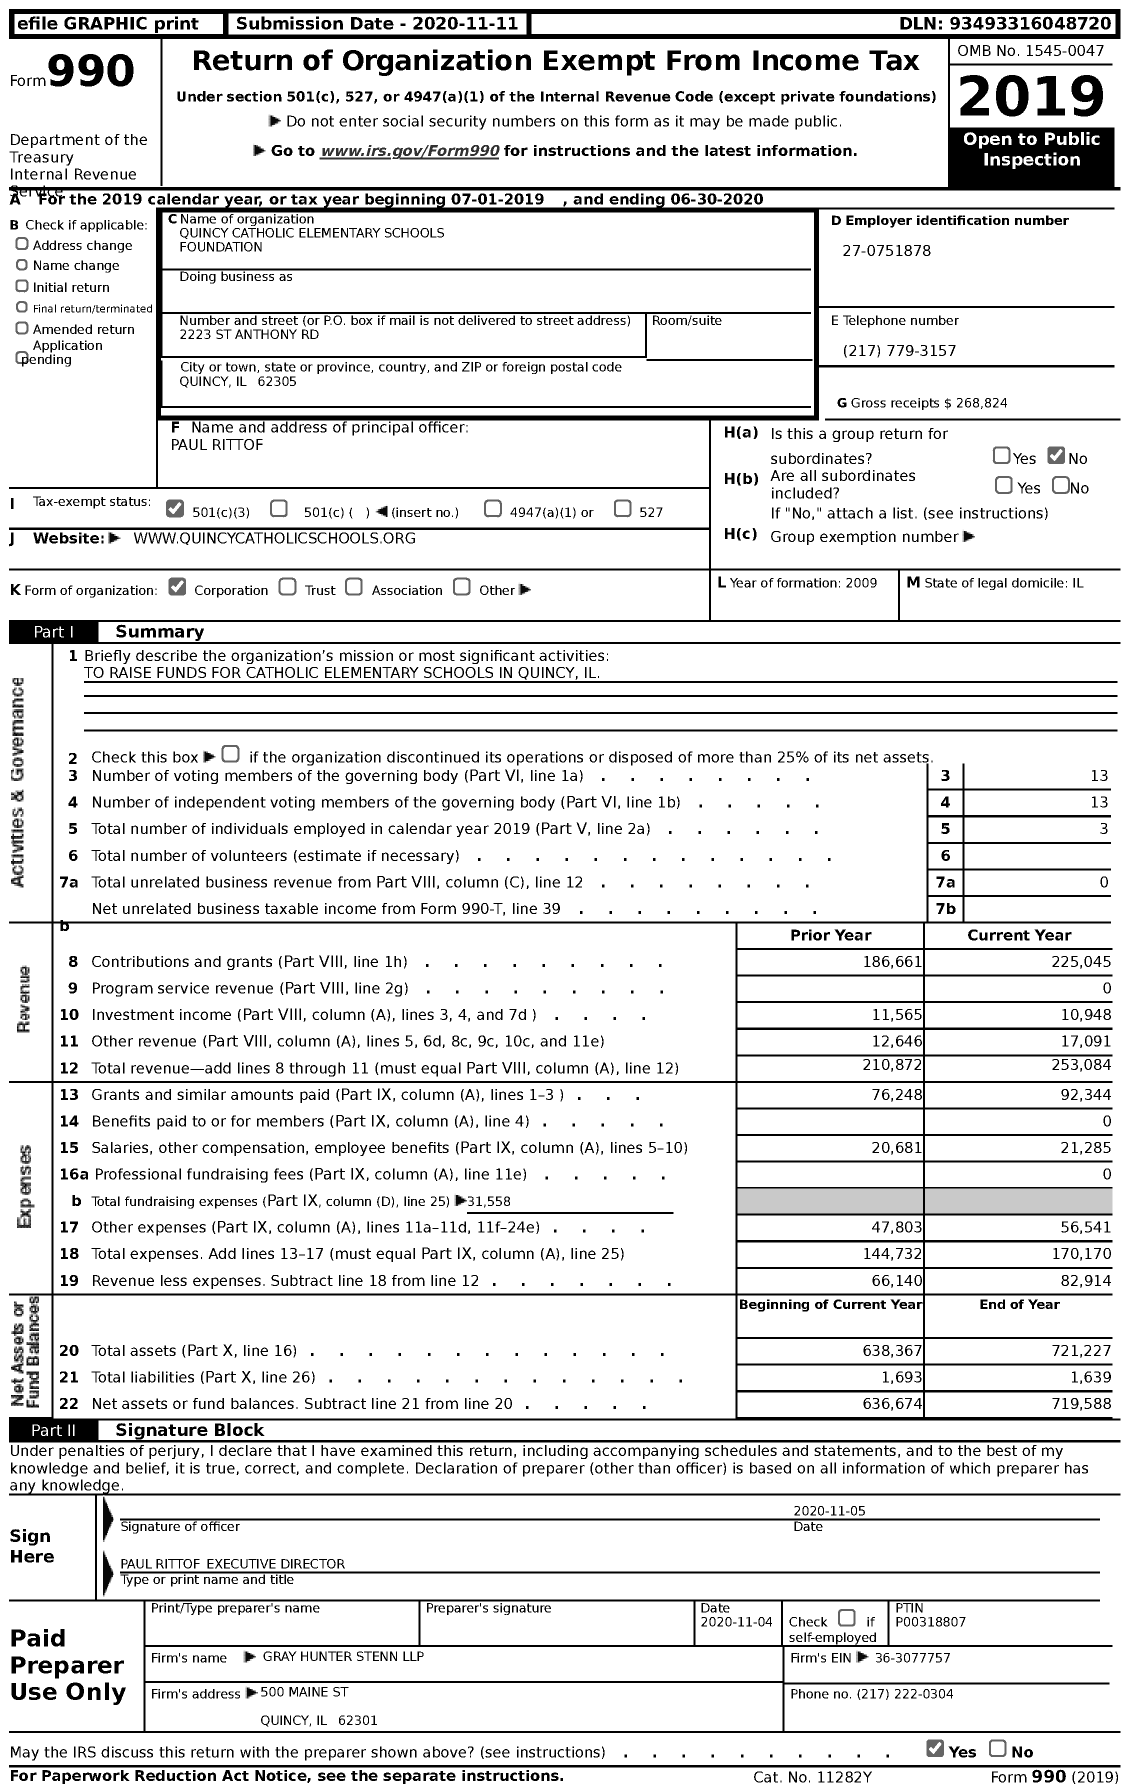 Image of first page of 2019 Form 990 for Quincy Catholic Elementary Schools Foundation